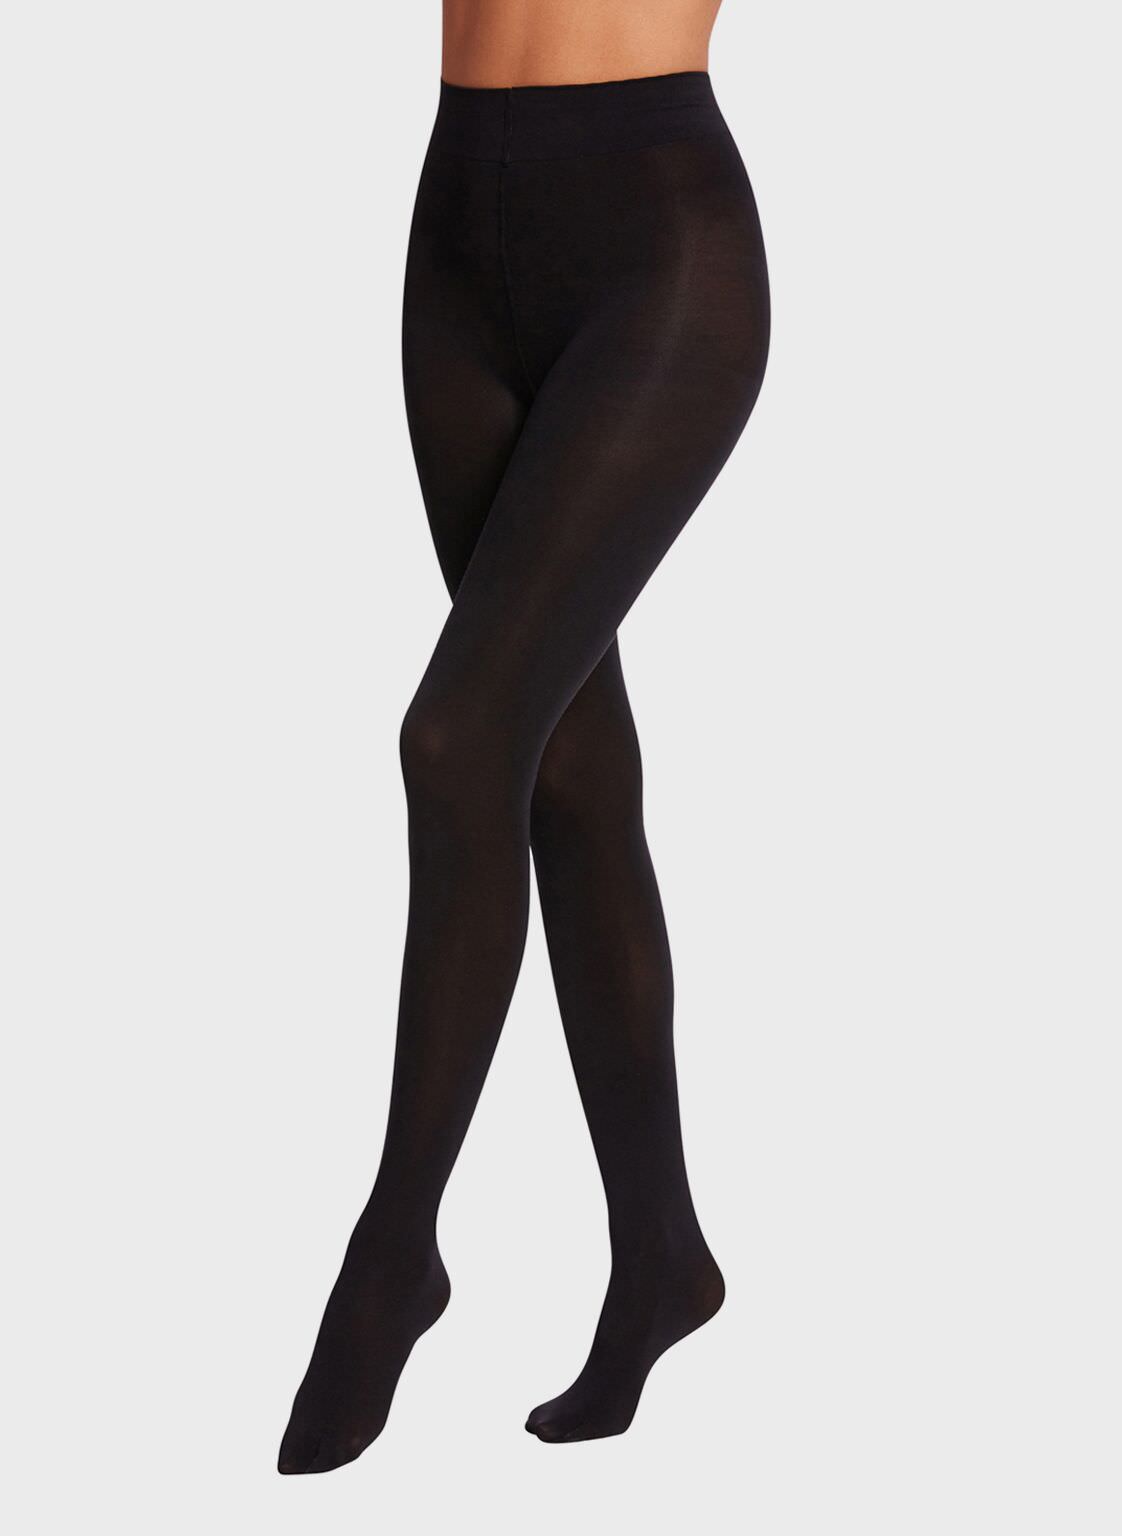 Navy Opaque Tights, Comfortable Low Rise Luxe Waistband